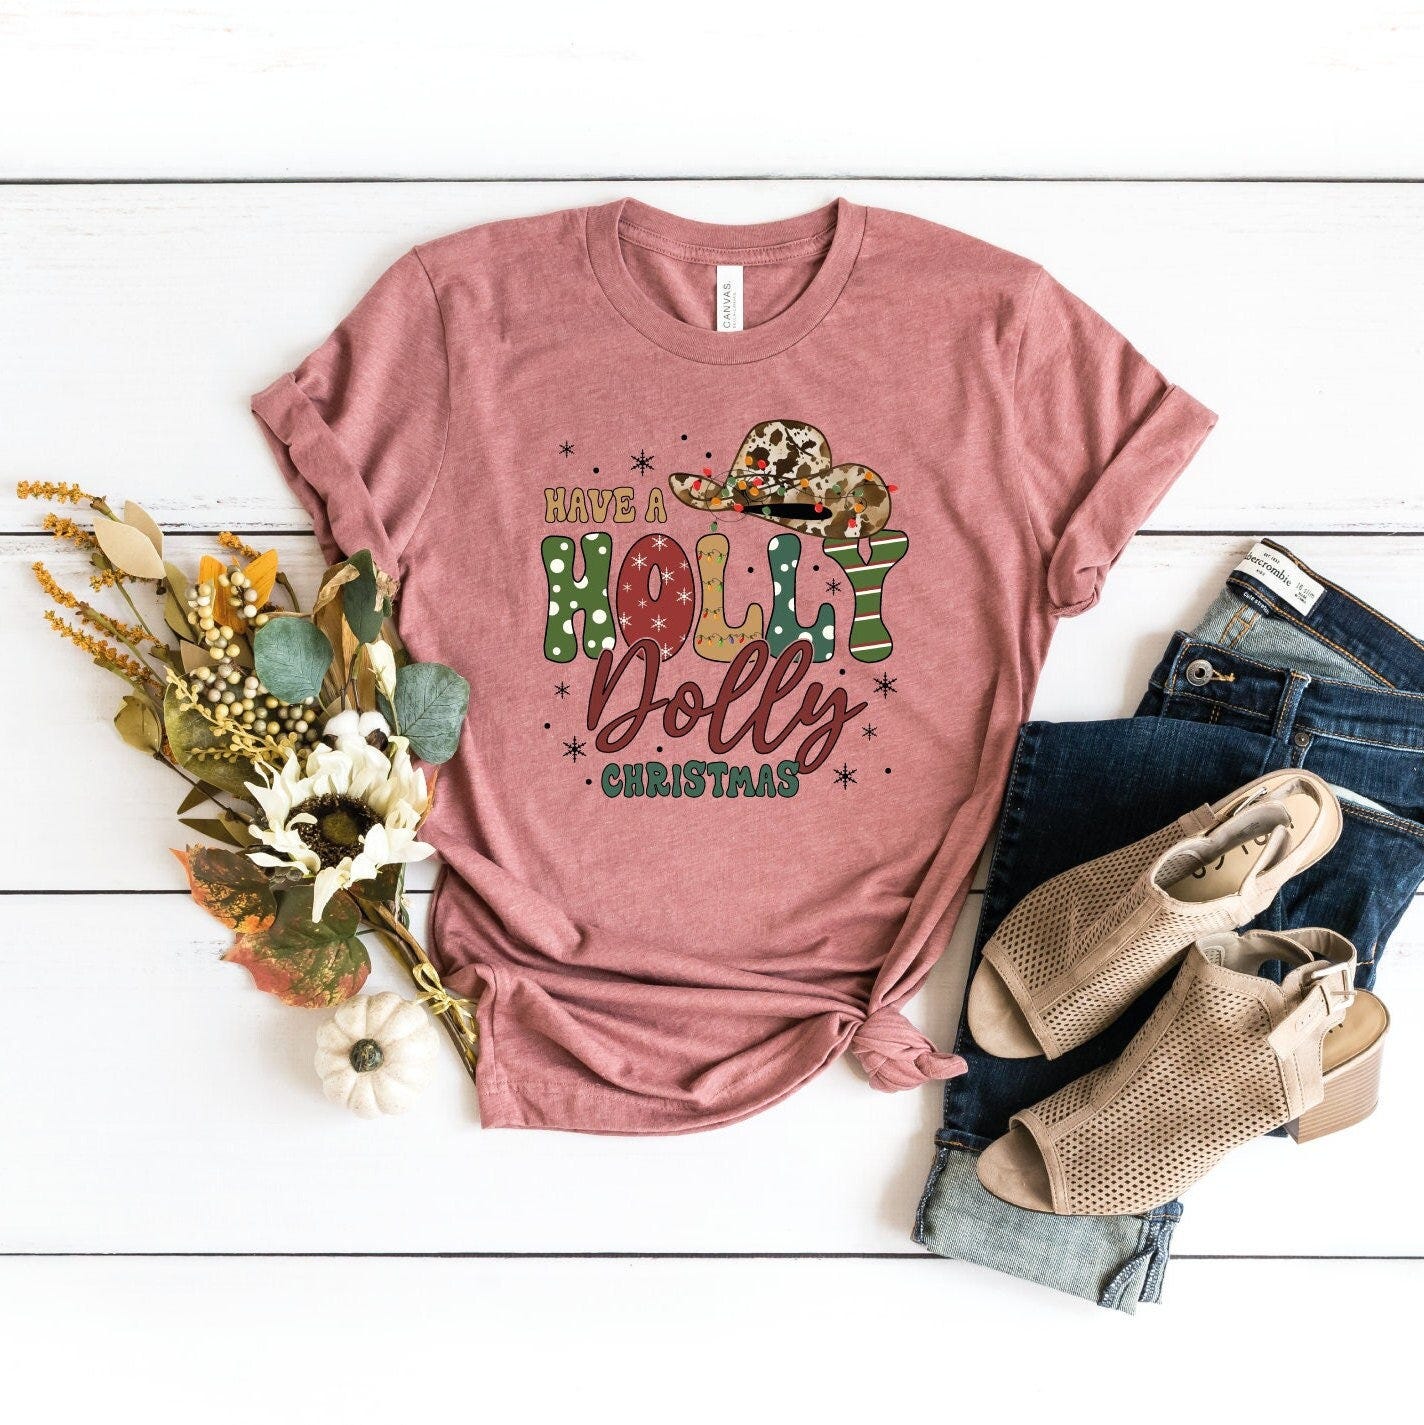 Have A Holly Dolly Christmas Shirt, Christmas Western Graphic Tee, Country Shirt Women Holly Jolly Shirt, Cowgirl Christmas Tee